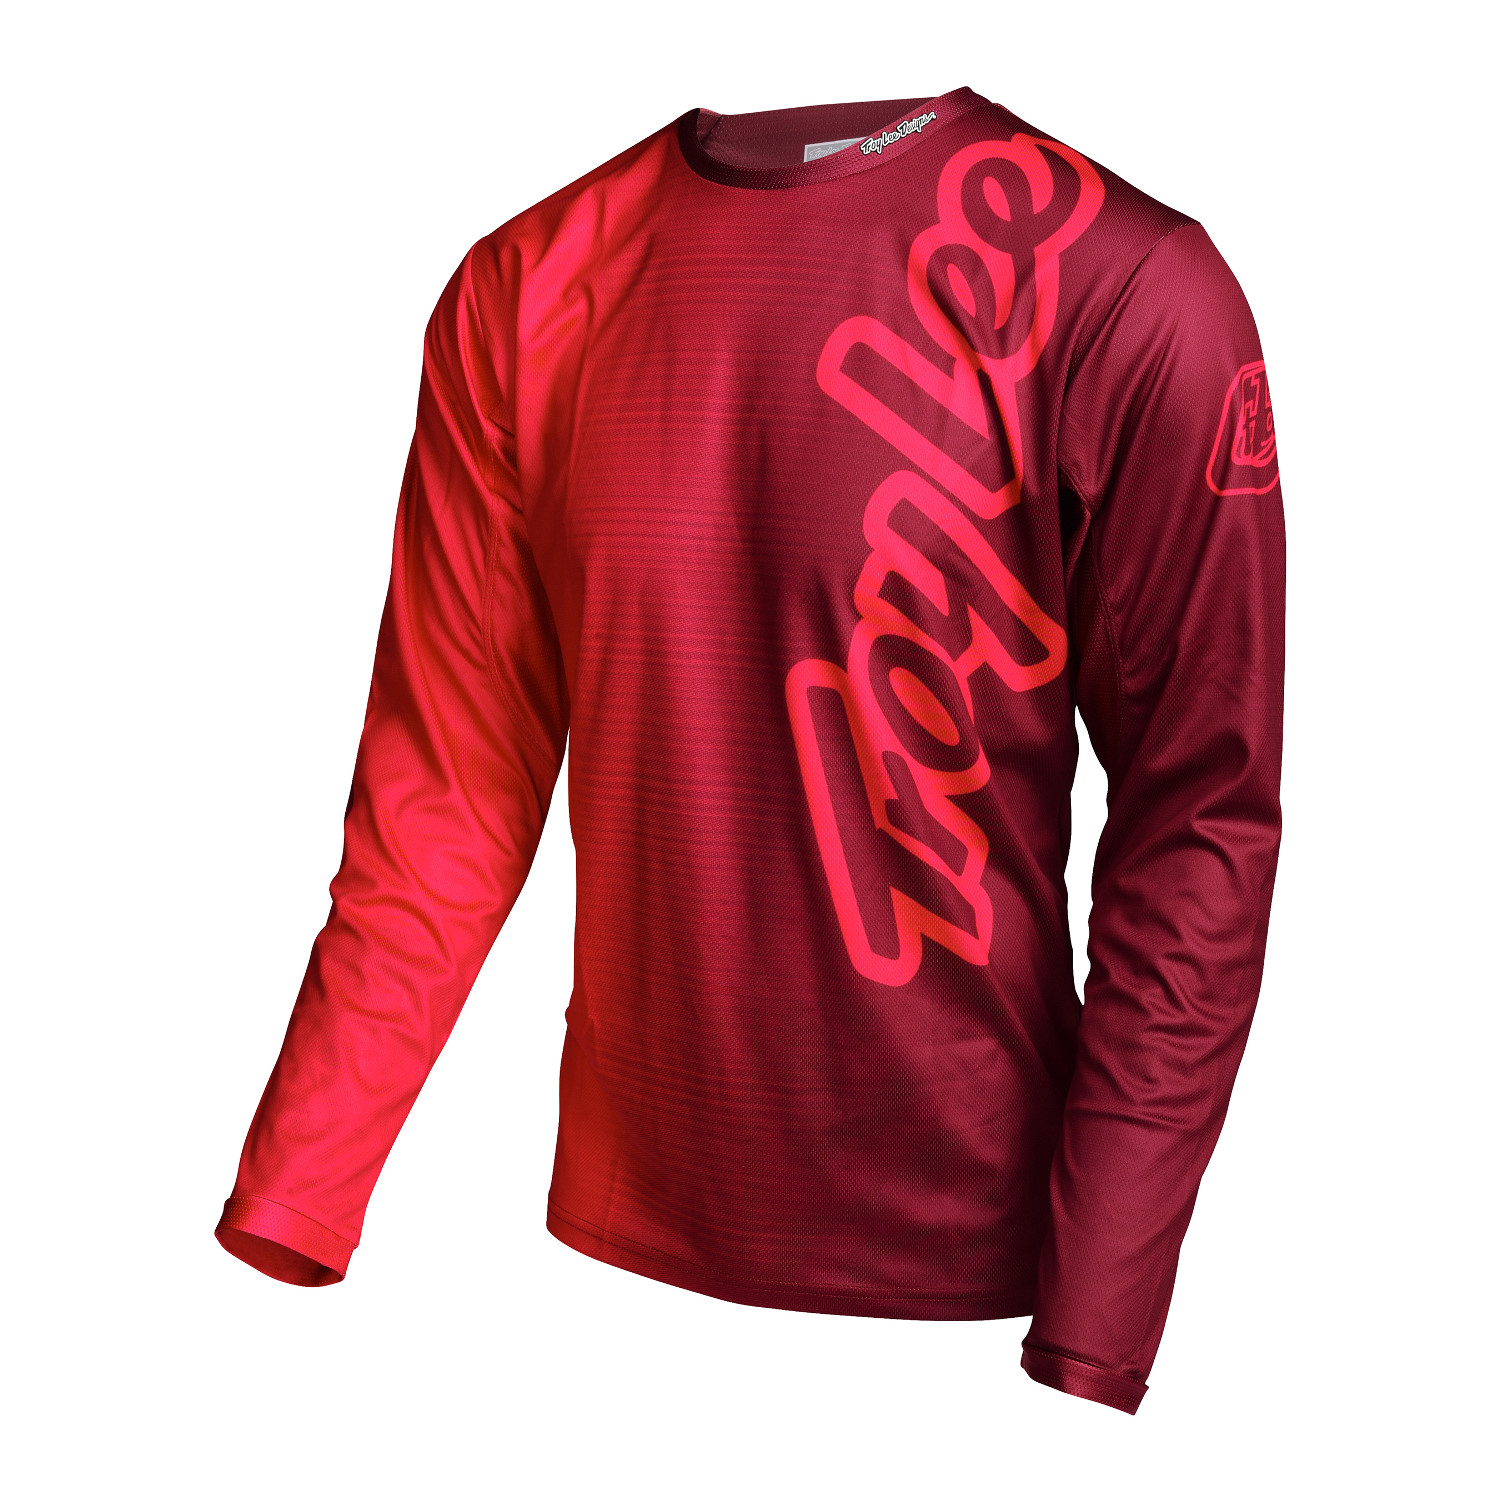 Troy Lee Designs Maillot VTT Manches Longues Sprint 50/50 - Red